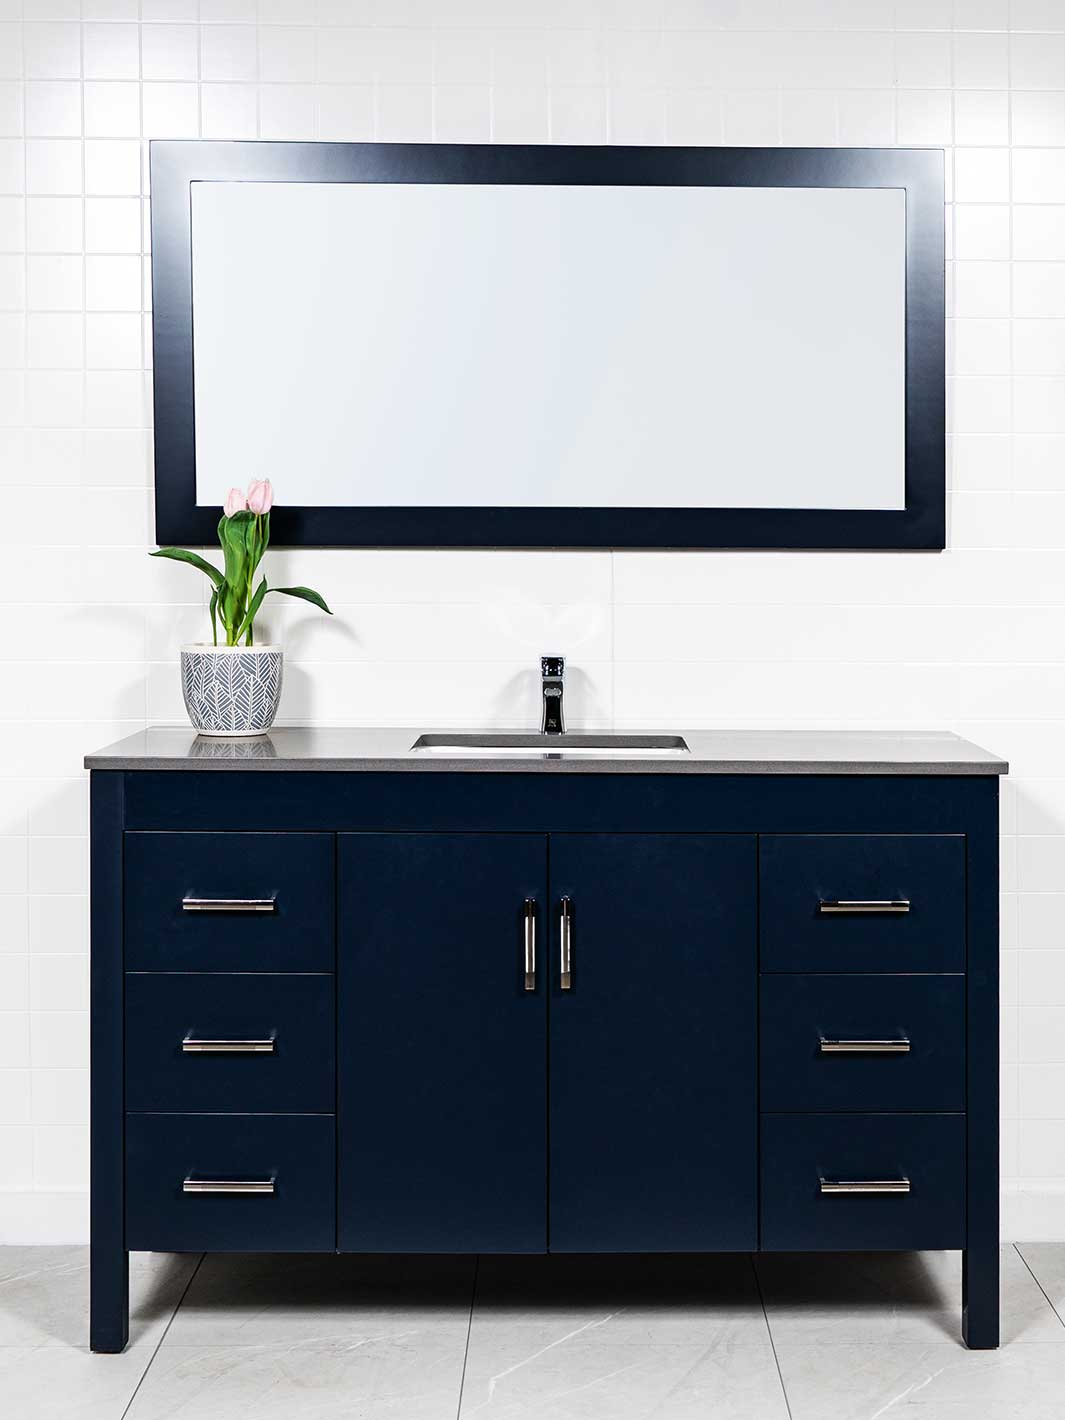 55 inch navy blue vanity with matching mirror. the vanity has 3 drawers on either side and a cupboard in the center